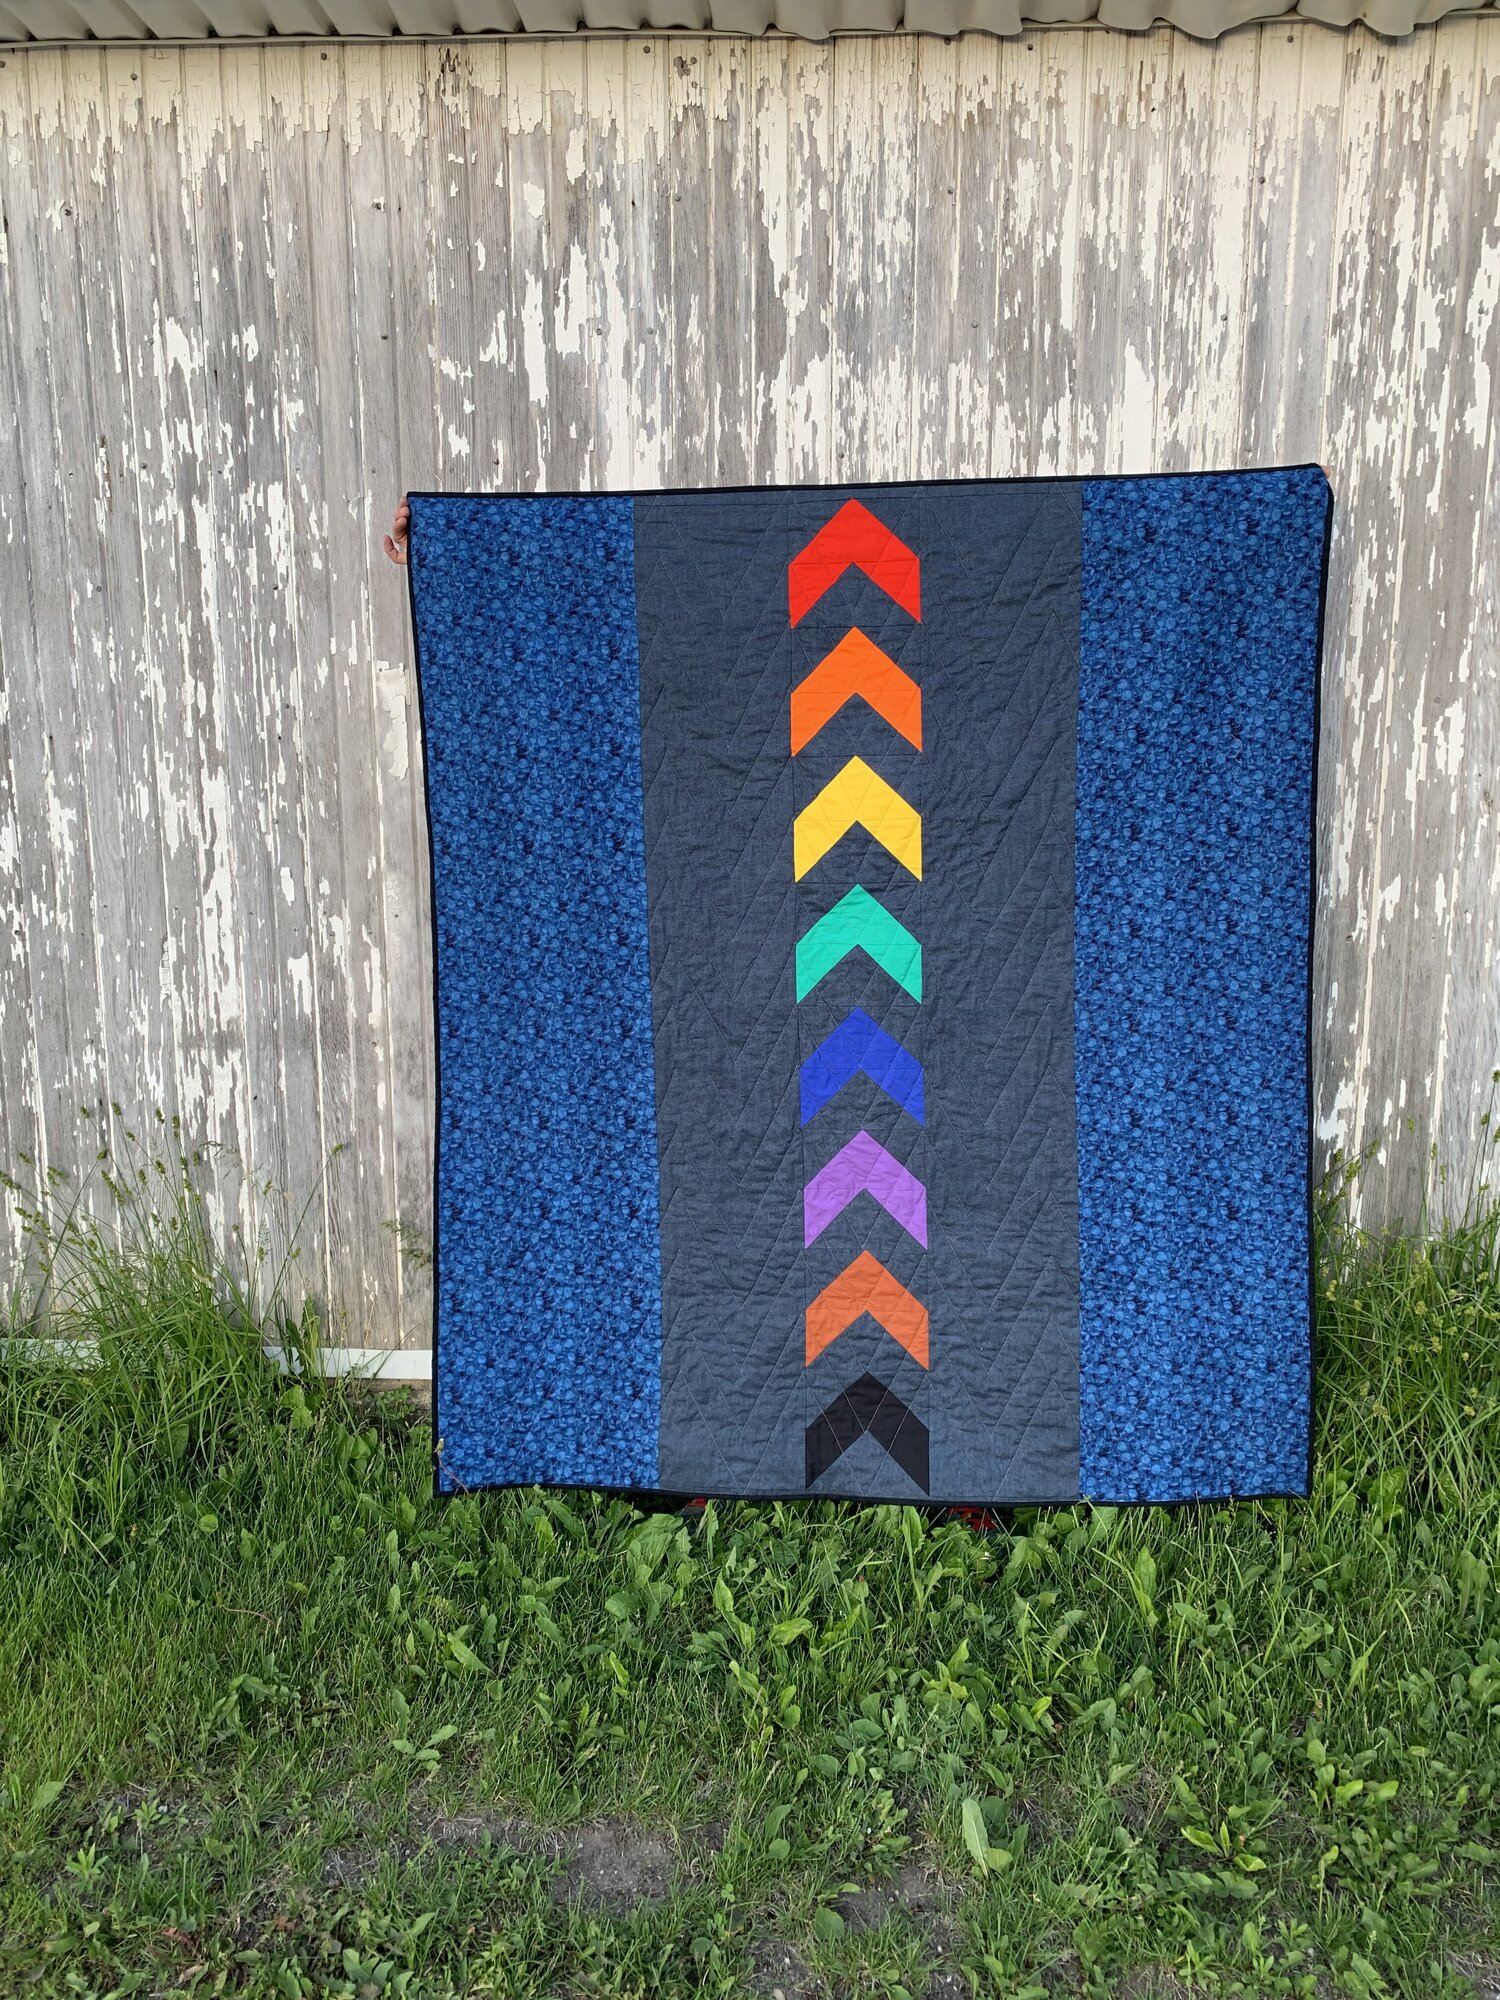 I just had to show the front and back of Melanie’s quilt! She used her pride flag kit from Art Gallery Fabrics, paired with a textured navy fabric for the background. I love how she used each color on two rows, which changed the look of the quilt! She also used the extra flying geese to make a pieced backing and it looks so amazing! Melanie shares her work on IG @koalamommily.